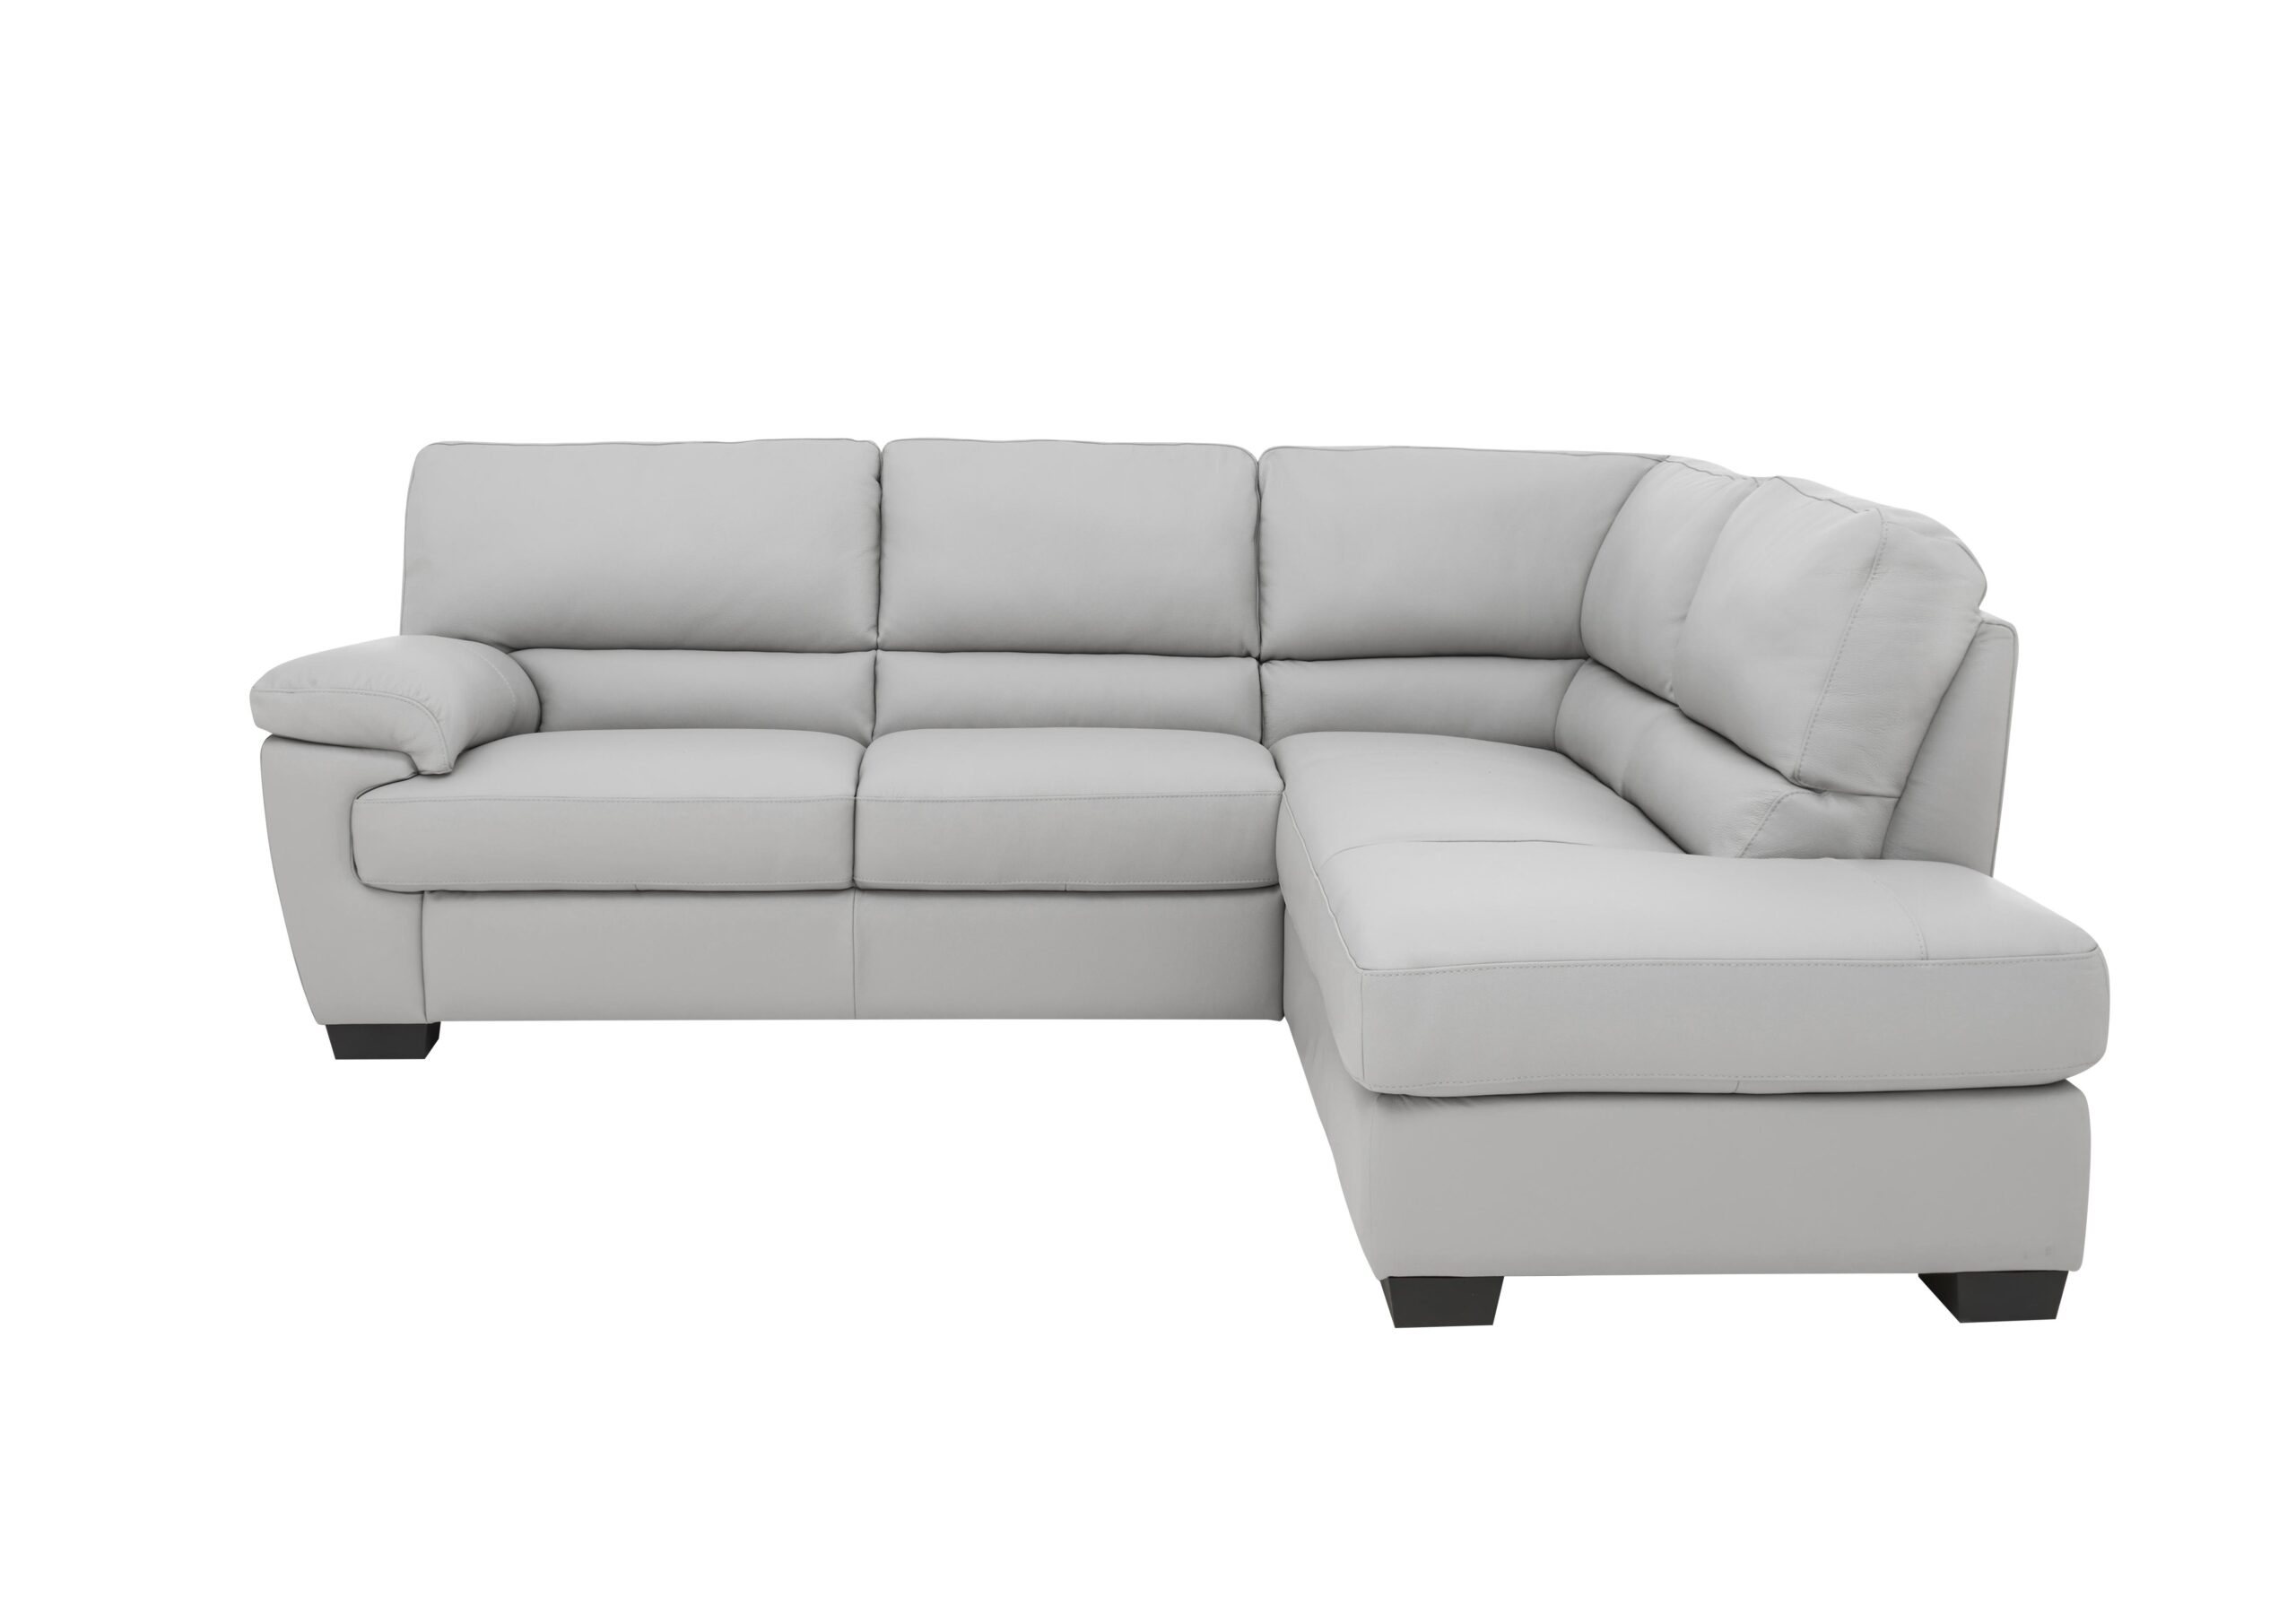 An overview of leather corner sofa